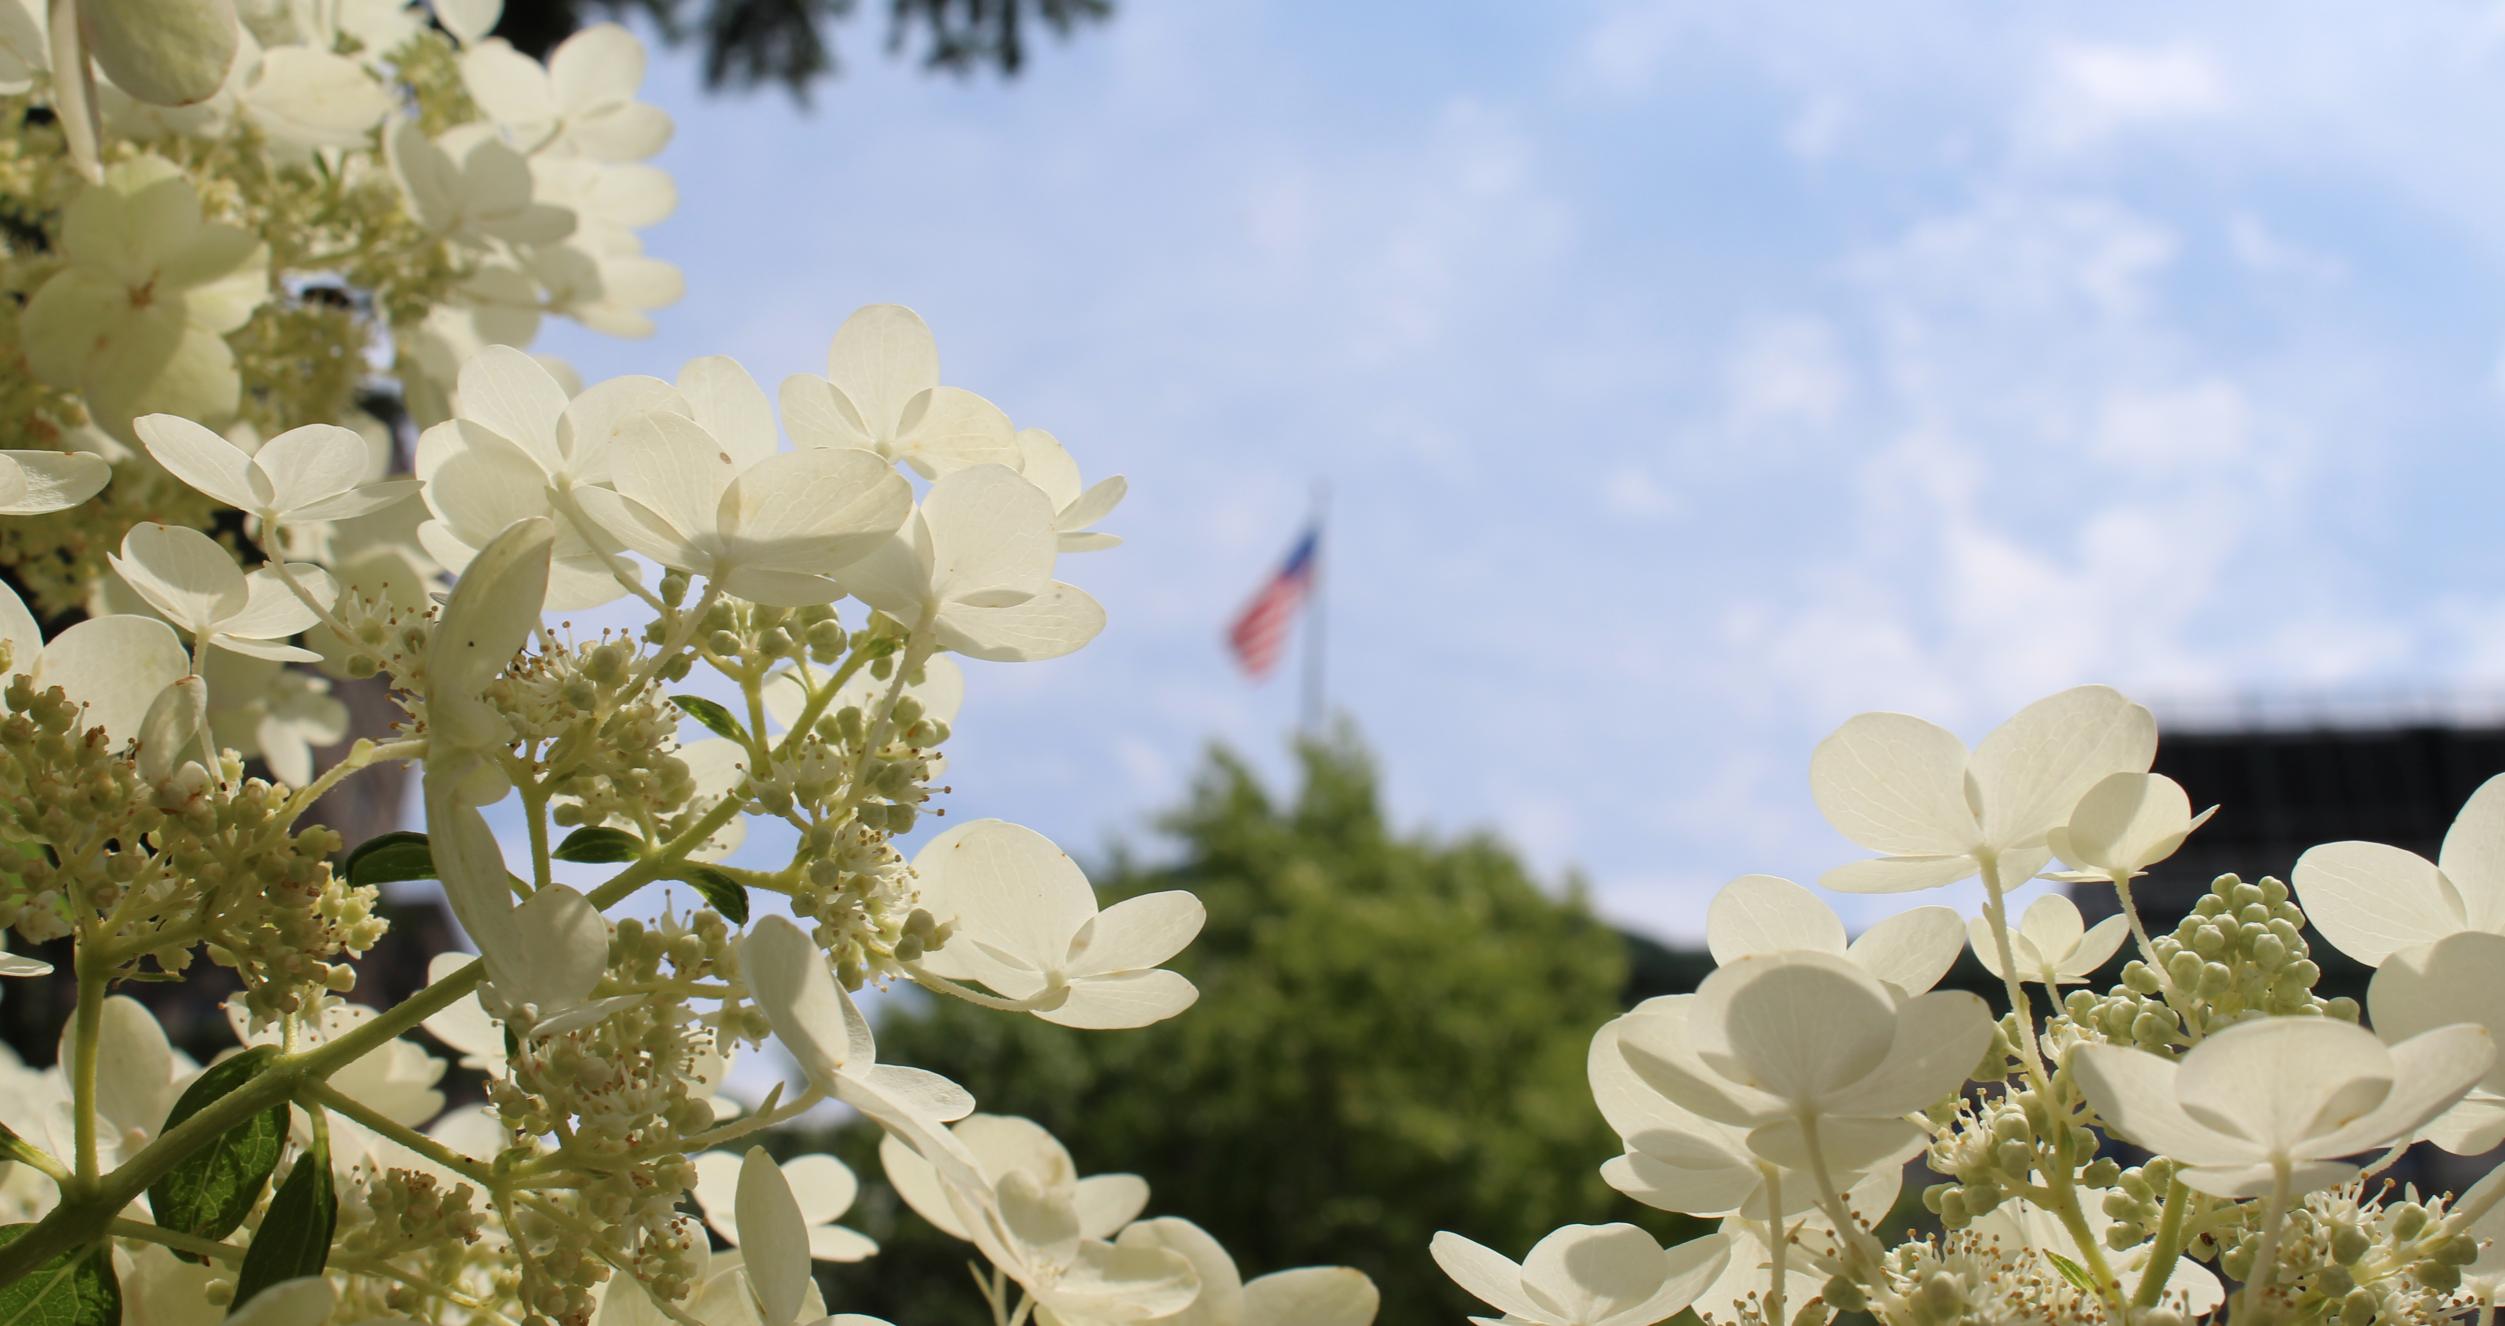 American Flag in blurred focus with flowers in foreground